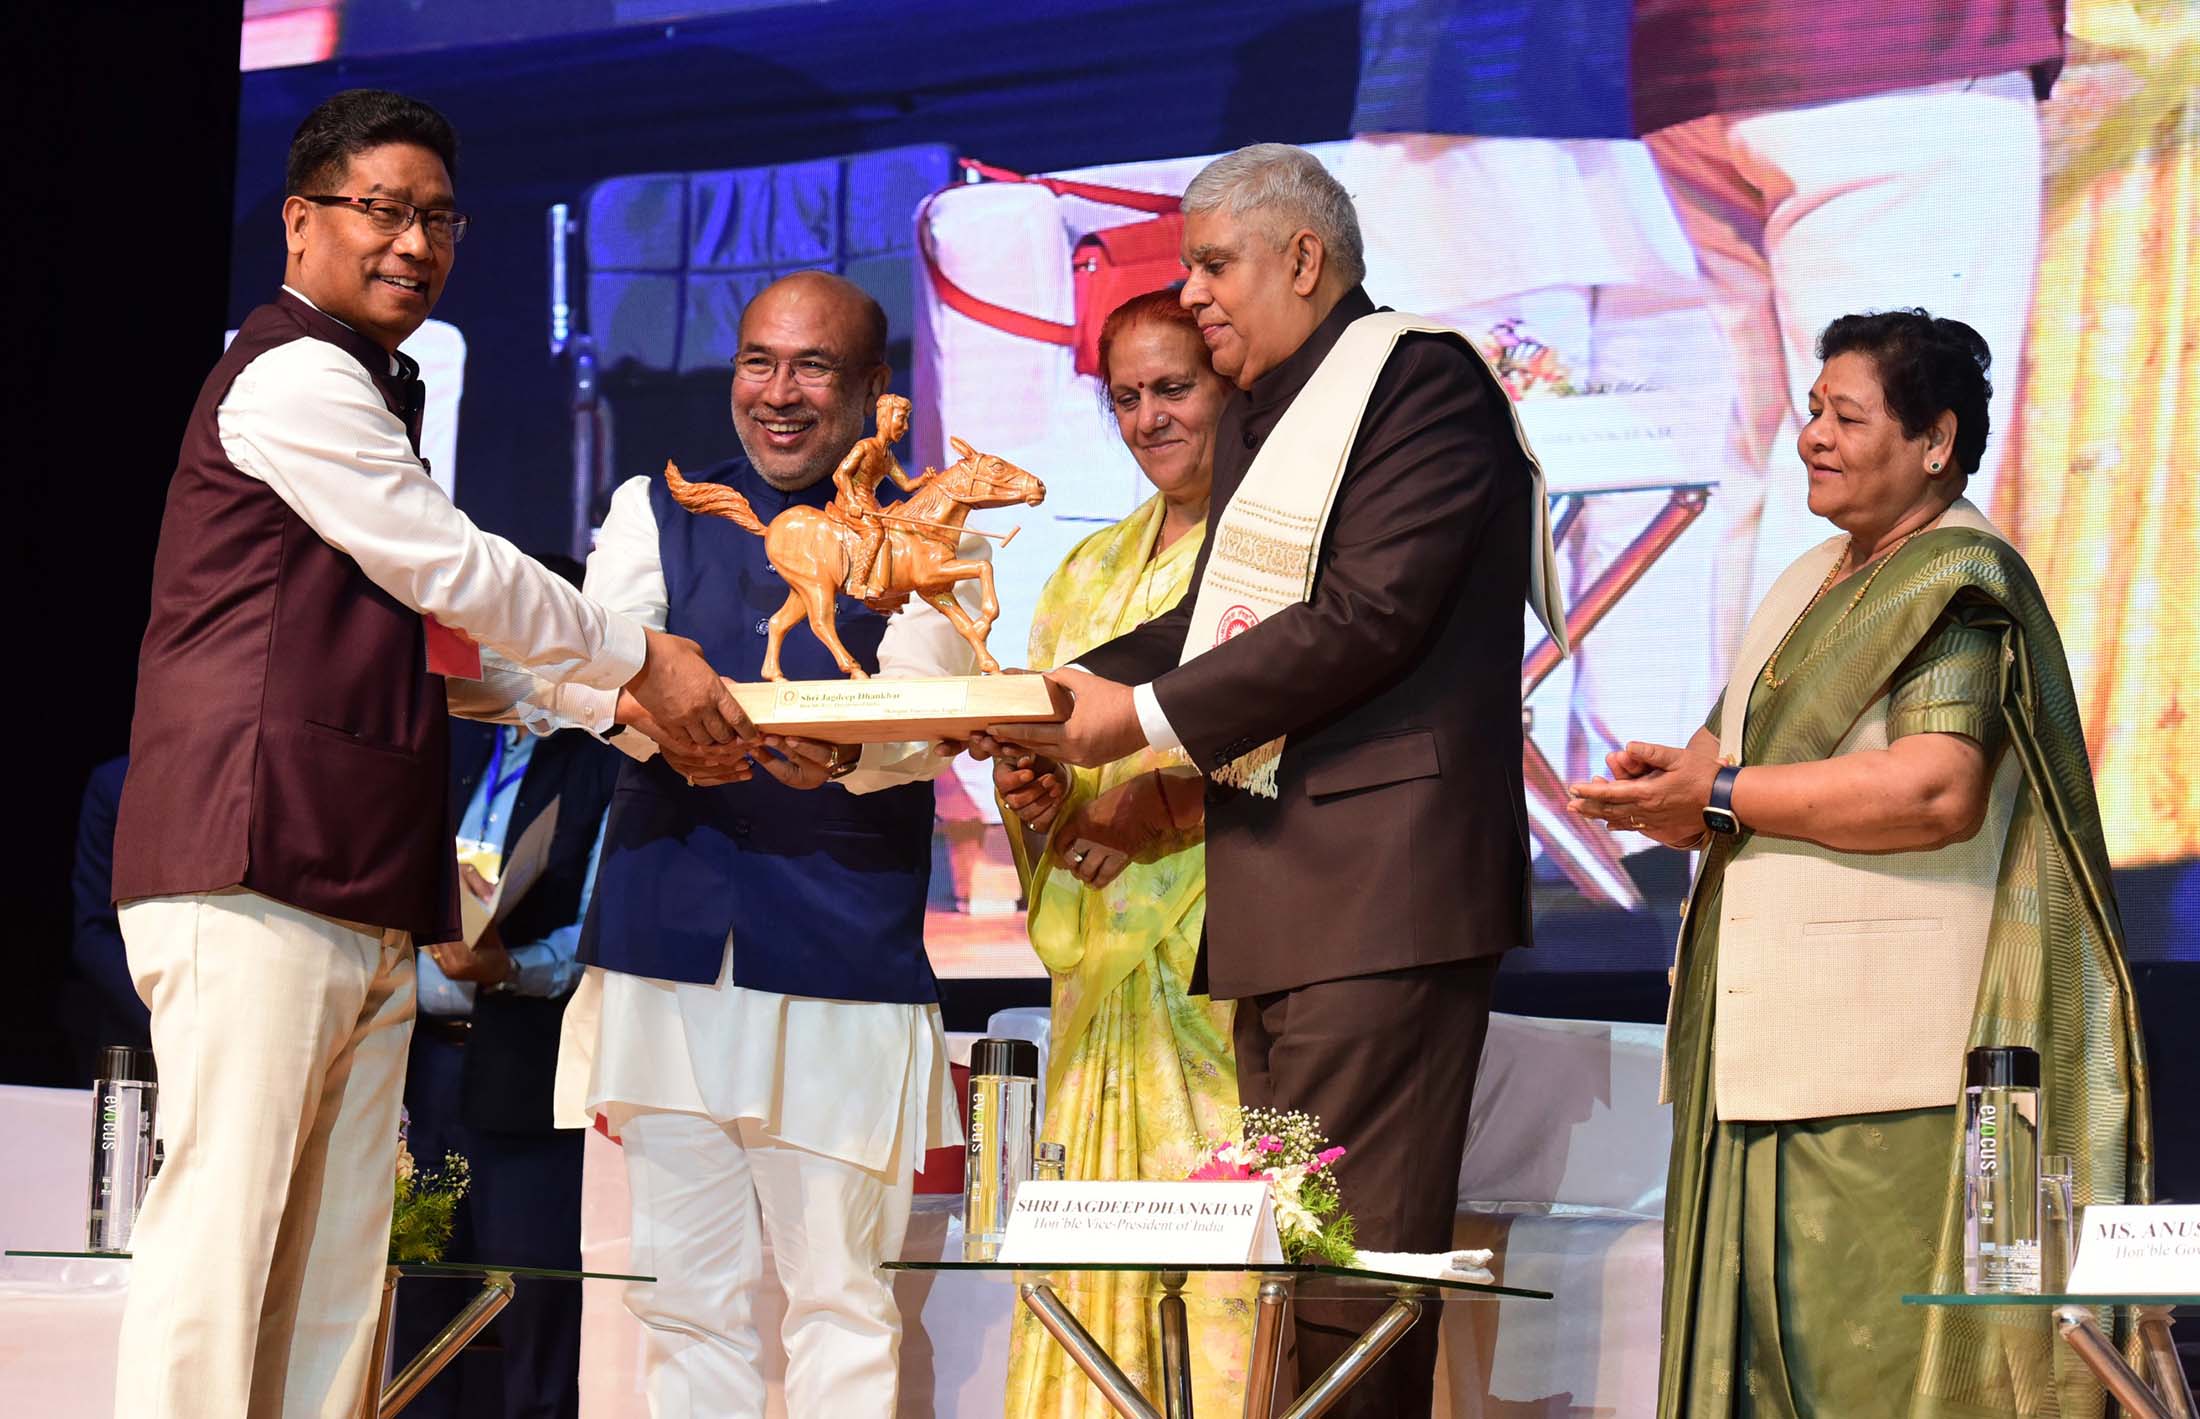 The Vice President, Shri Jagdeep Dhankhar being falicitated during an Interaction Programme with Faculties, Scientists and Master Craftpersons at Manipur University in Imphal, Manipur on May 3, 2023.